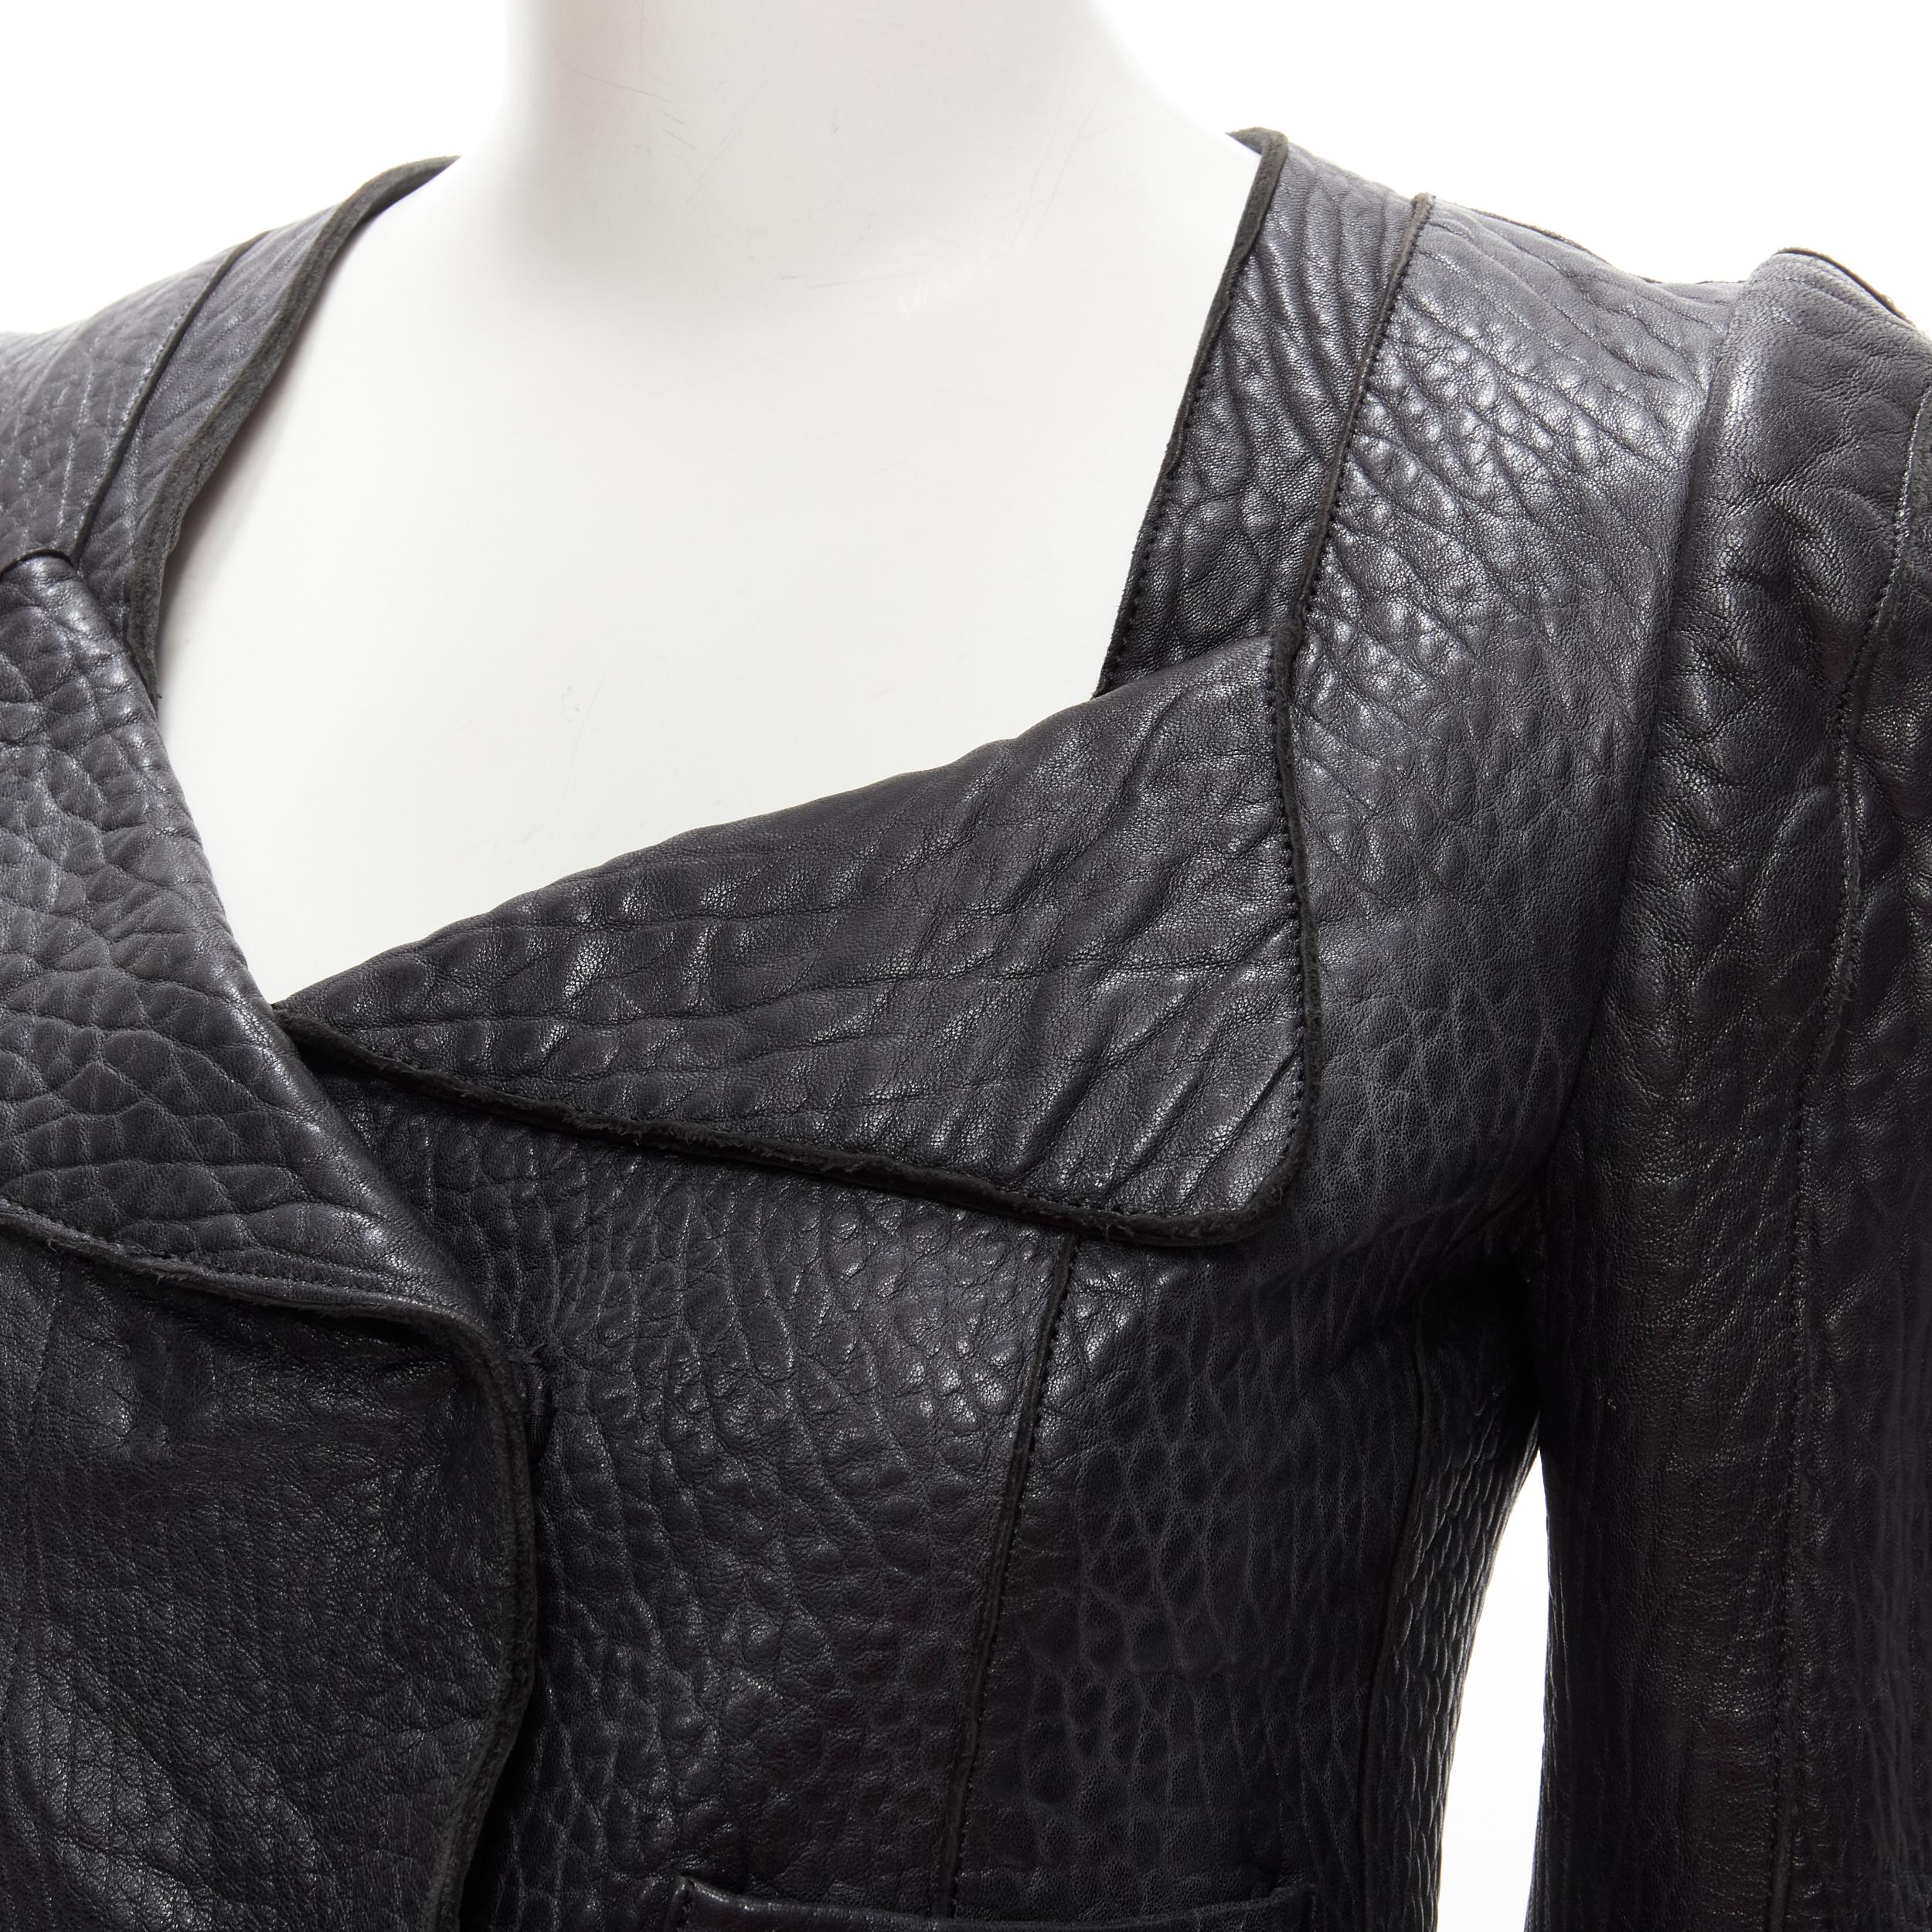 CARVEN black textured leather padded shoulder double breasted blazer IT38 XS
Brand: Carven
Extra Detail: Croc pattern pebble textured leather. Wide foldover collar. Double breasted snap button. Double patch pocket at waist. Padded